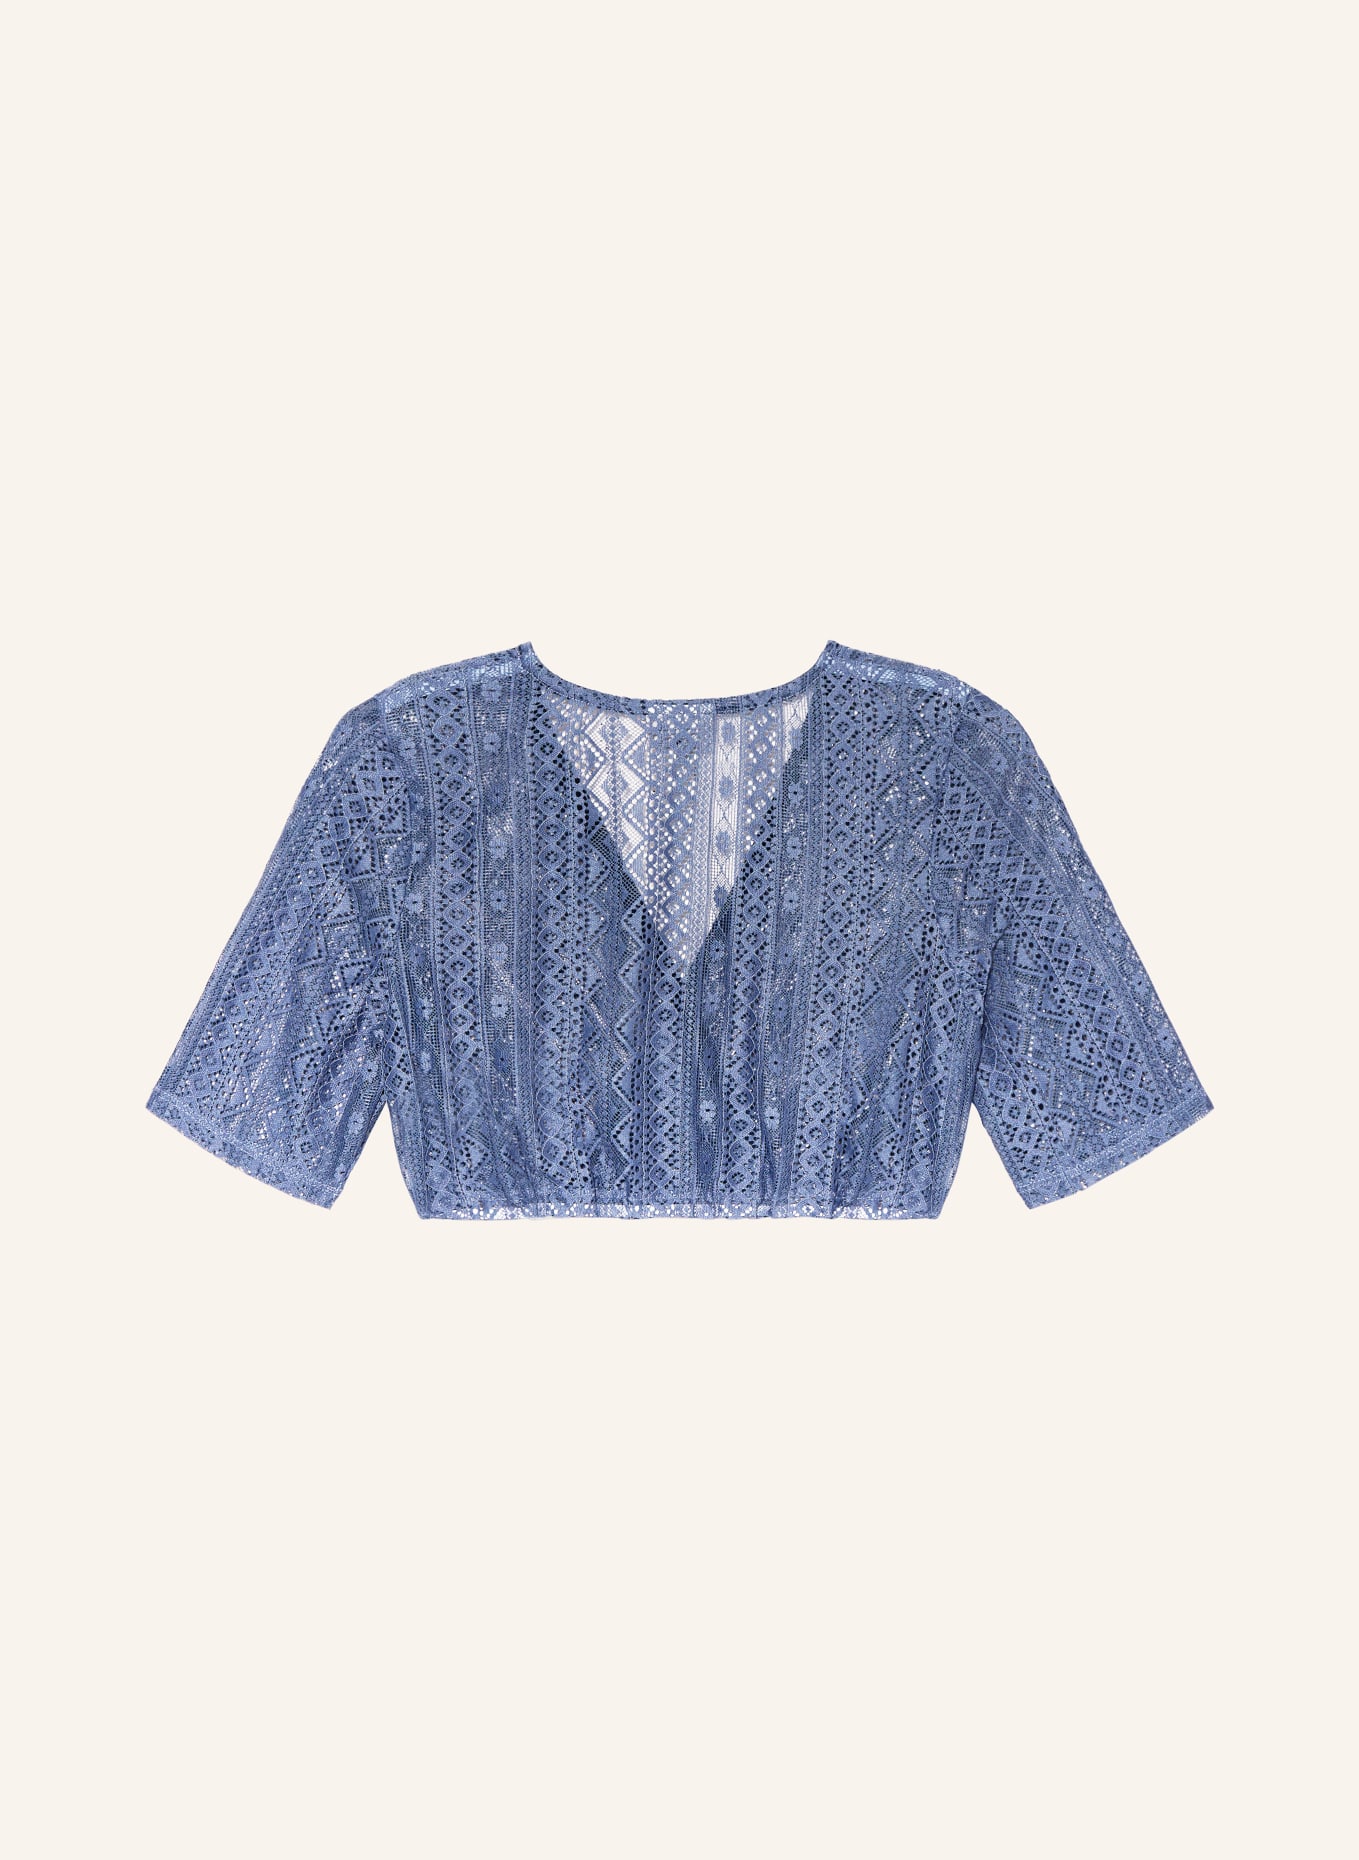 BERWIN & WOLFF Dirndl blouse made of lace, Color: BLUE (Image 2)